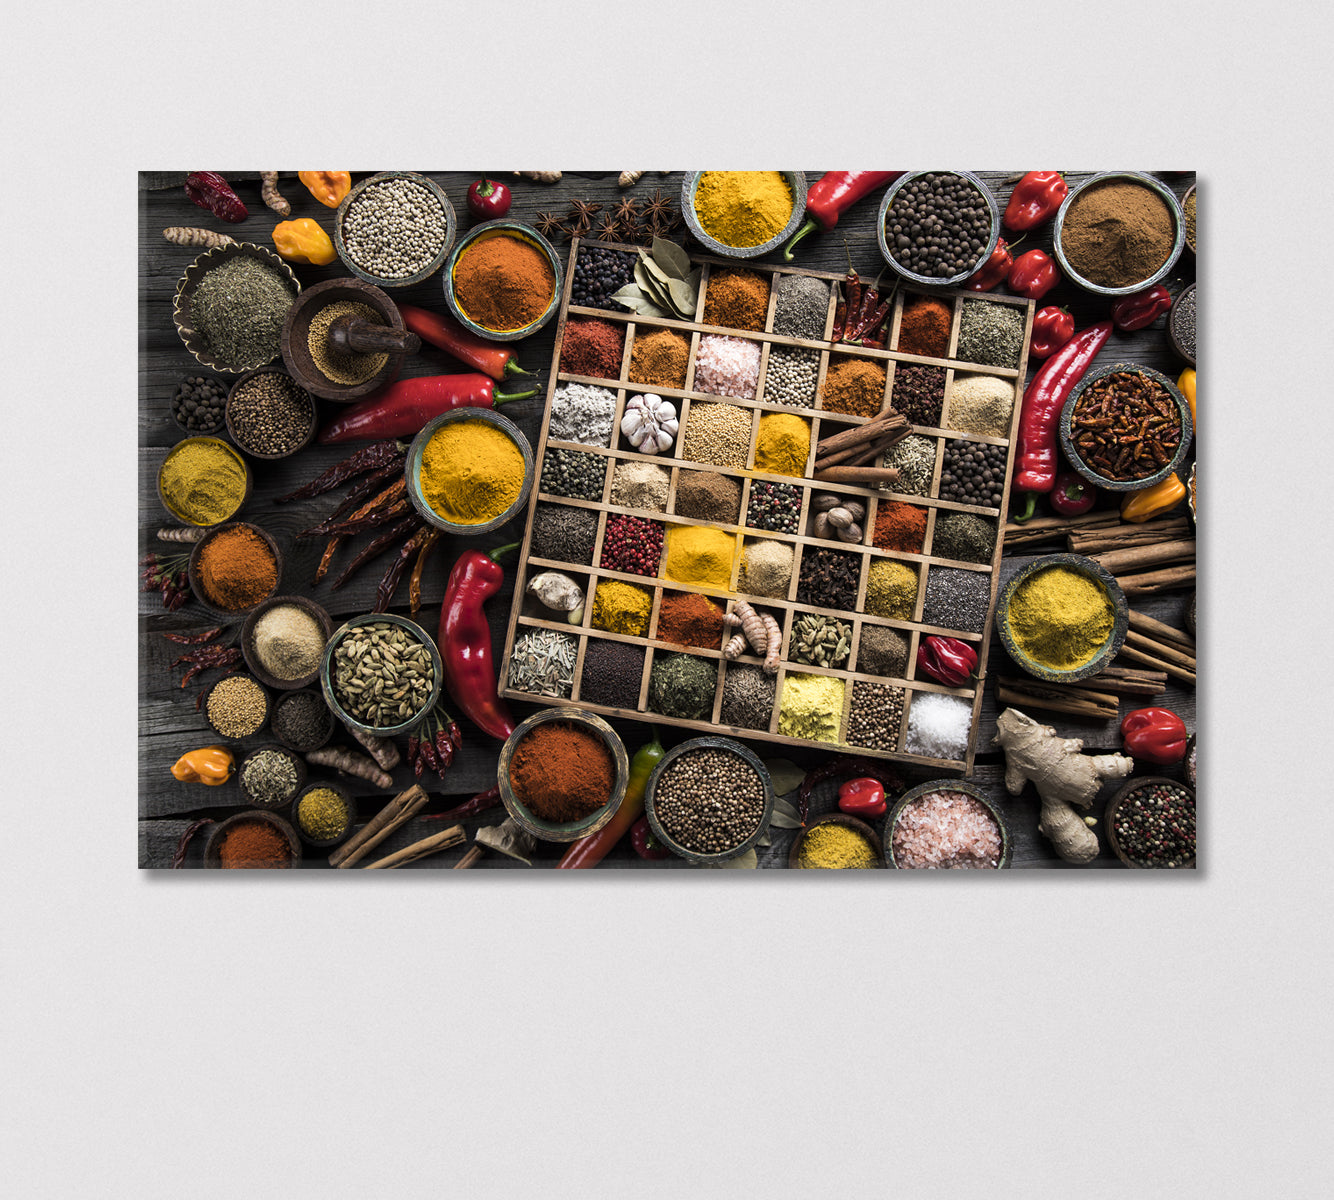 Variety of Spices and Herbs Canvas Print-Canvas Print-CetArt-1 Panel-24x16 inches-CetArt